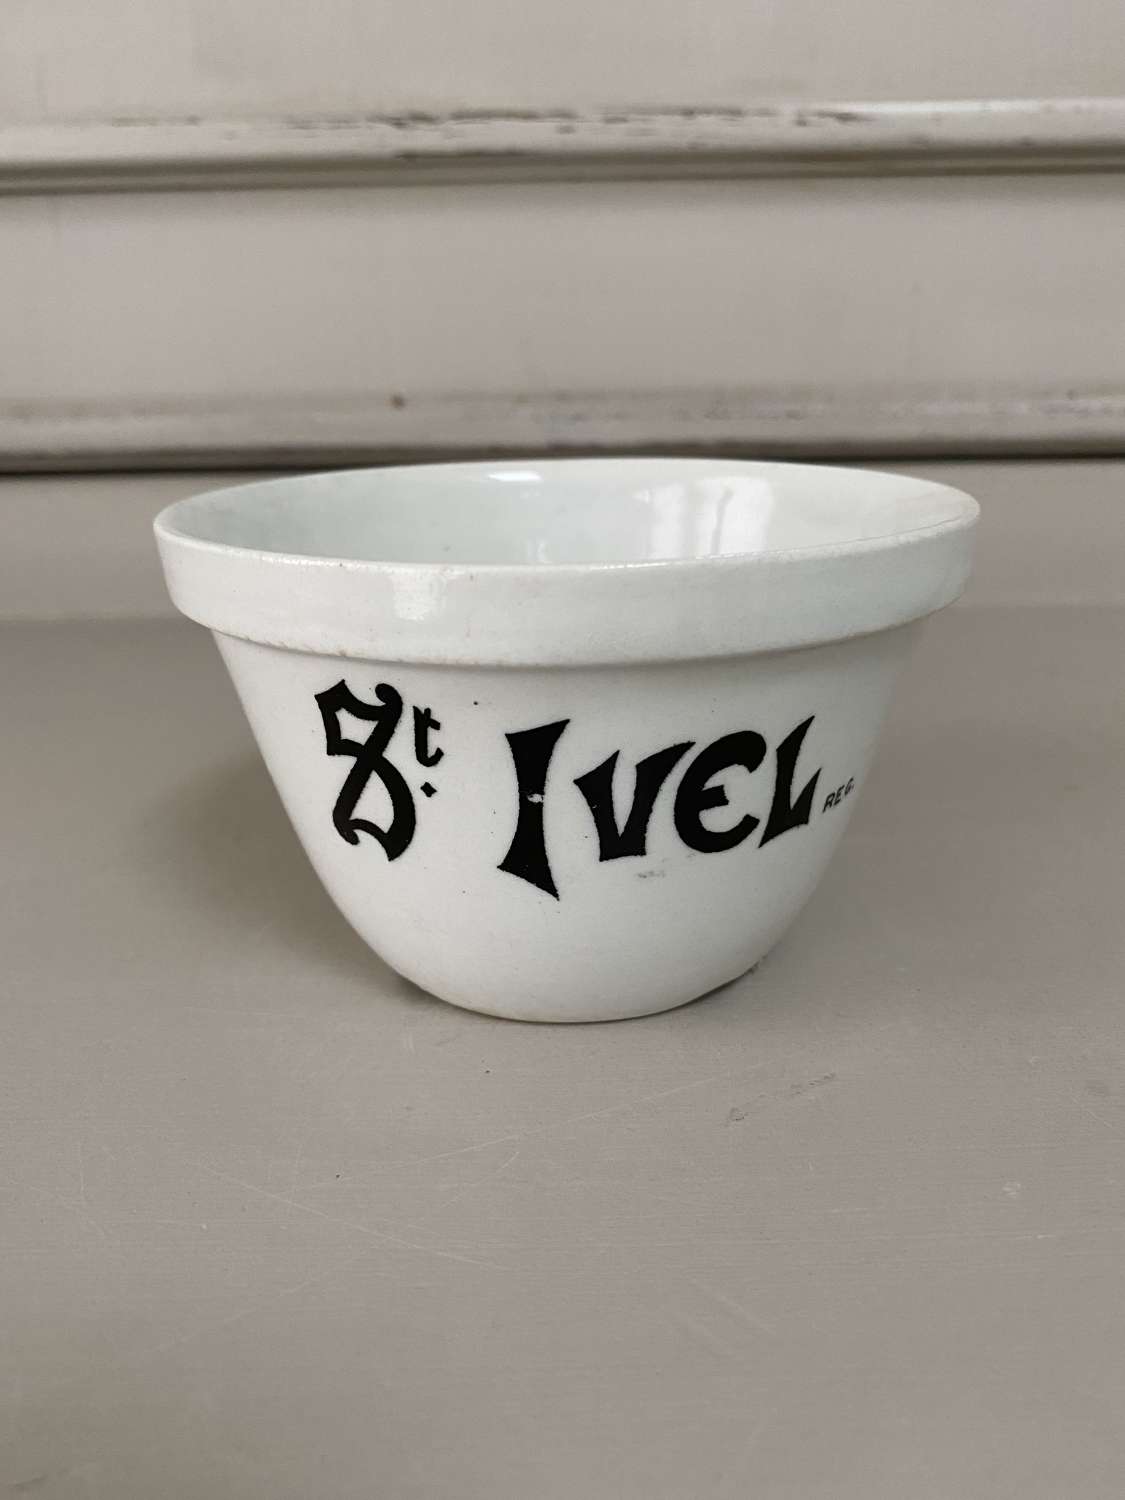 Early 20th Century White Ironstone Advertising Pudding Bowl - St Ivel